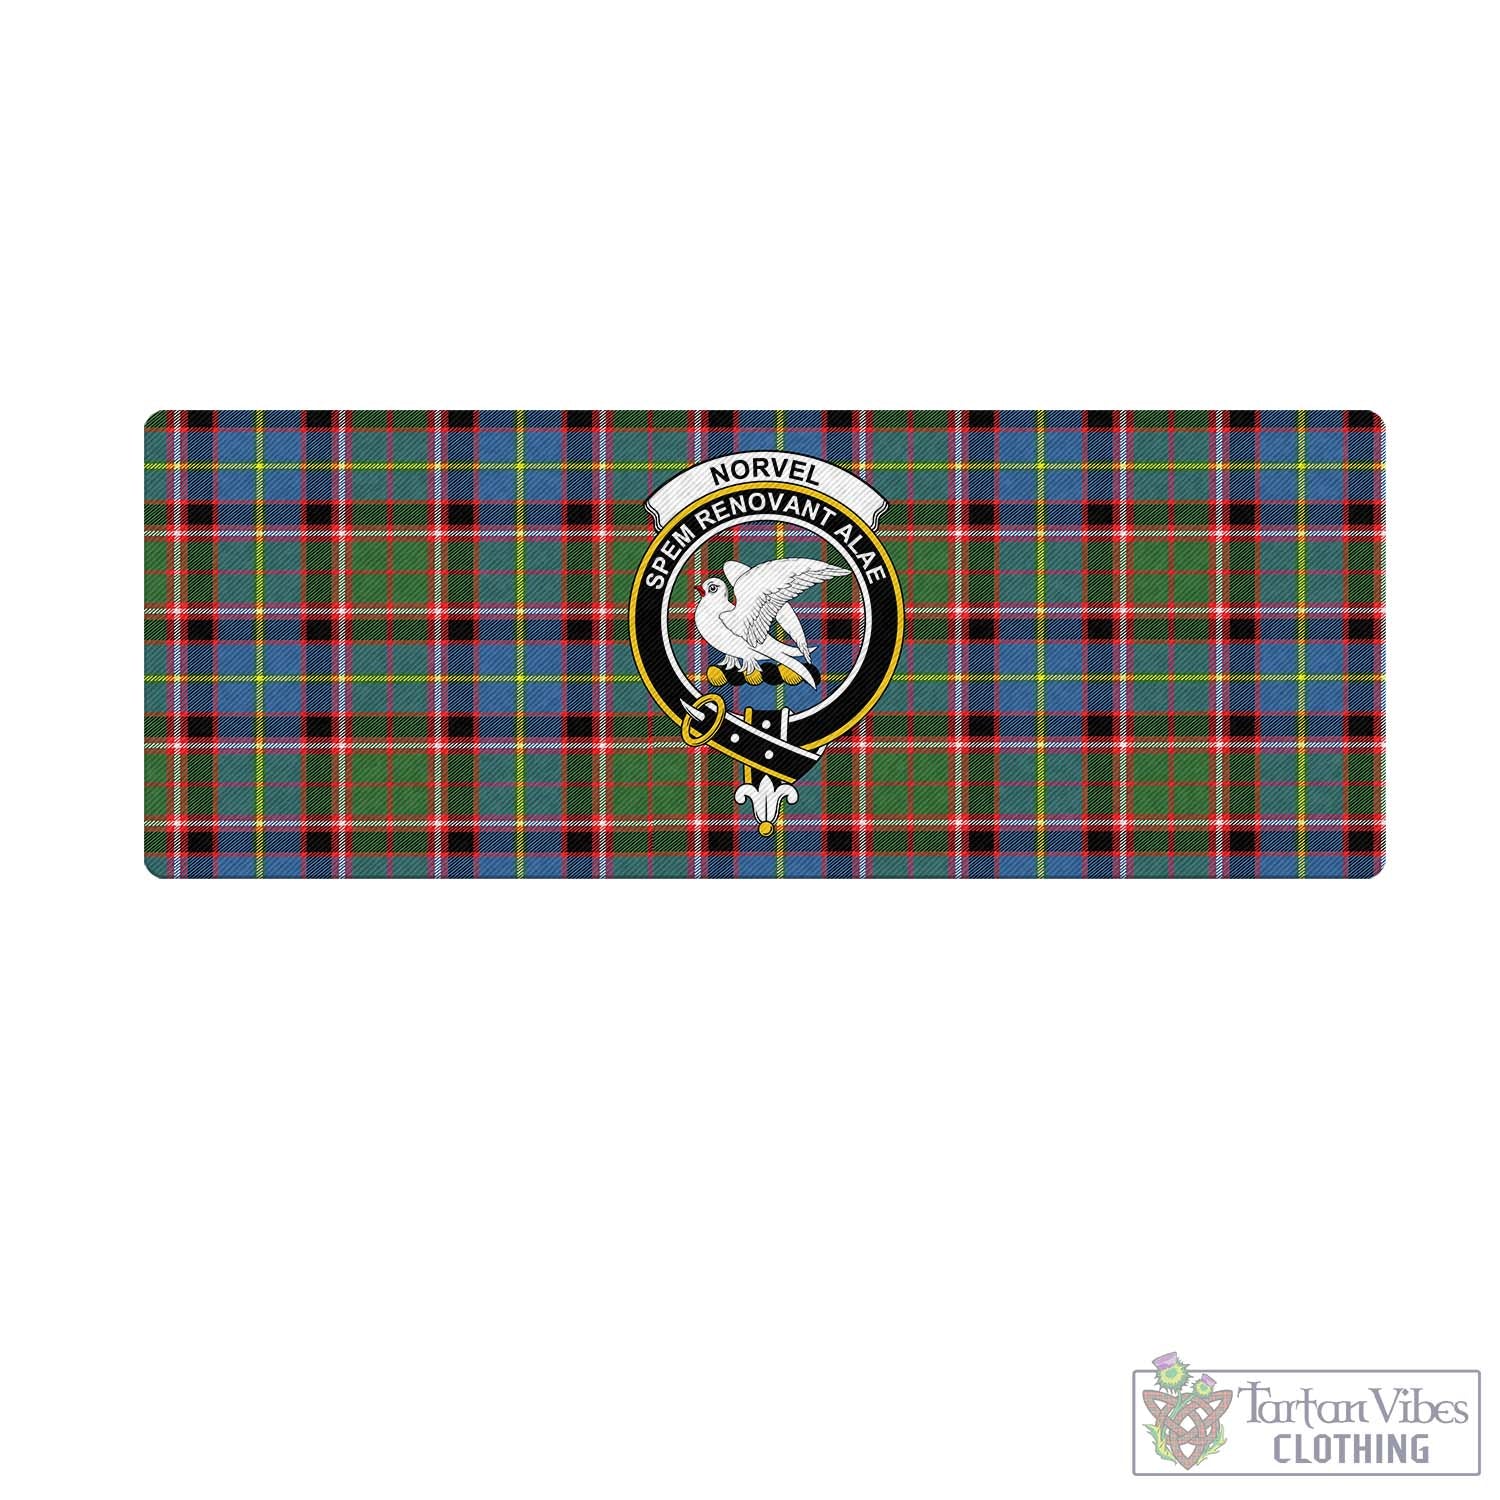 Tartan Vibes Clothing Norvel Tartan Mouse Pad with Family Crest